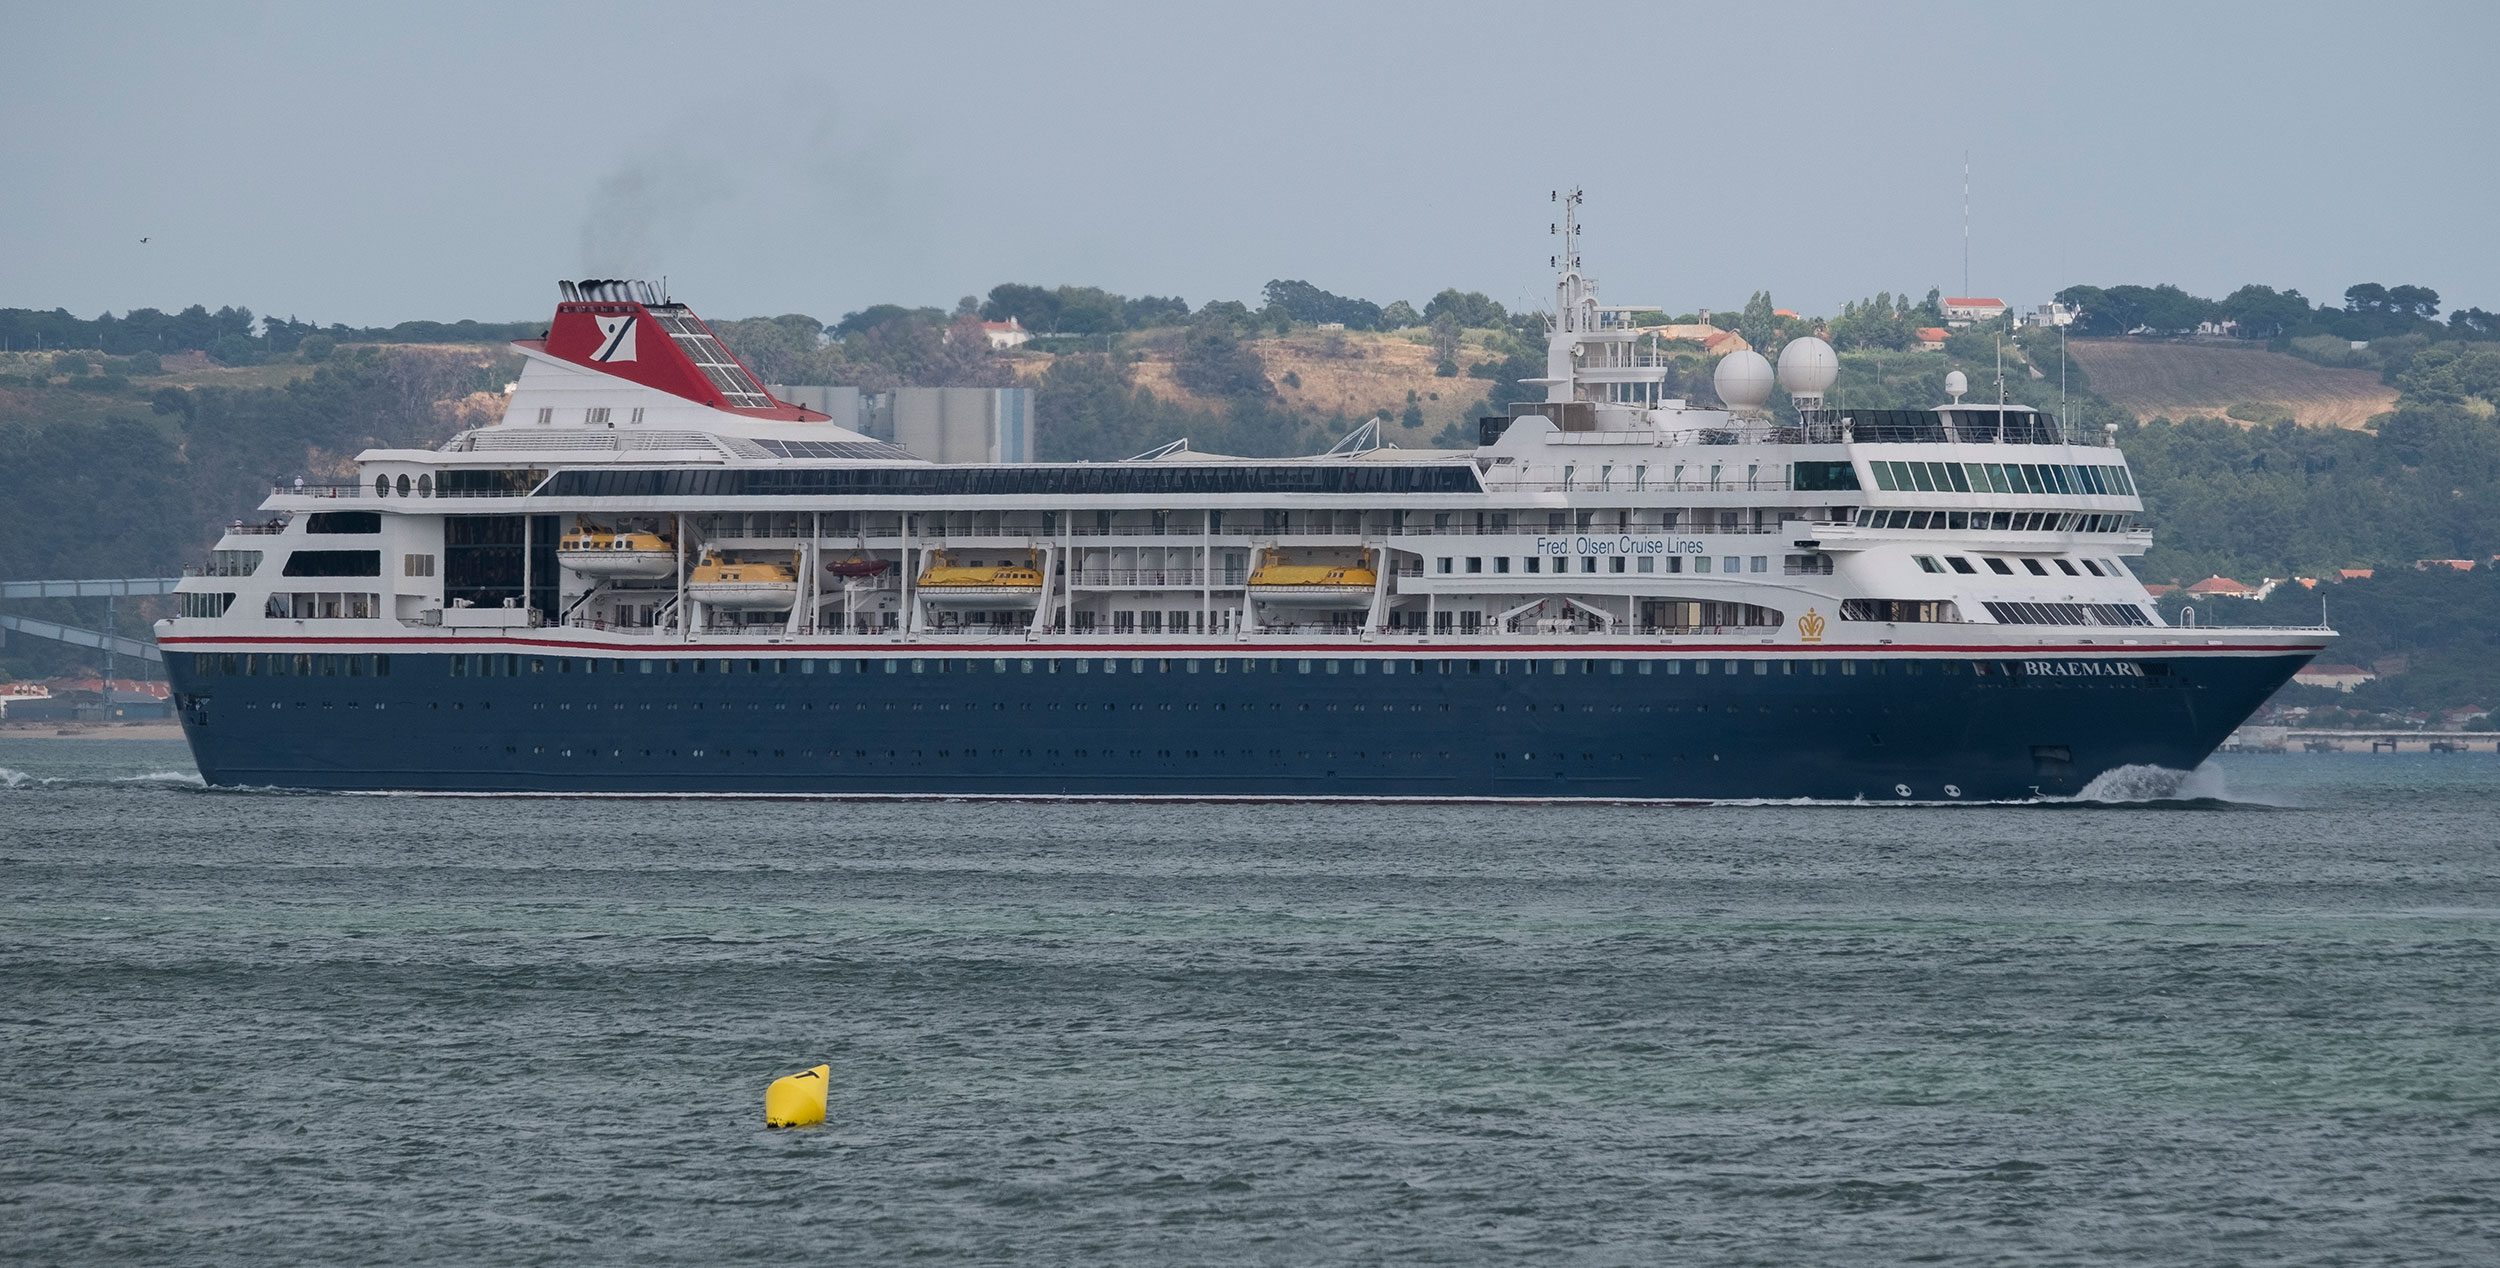 Cruise ship MS Braemar operated by Fred Olsen Cruise Lines leaves harbor in Lisbon, Portugal, on July 19, 2018.